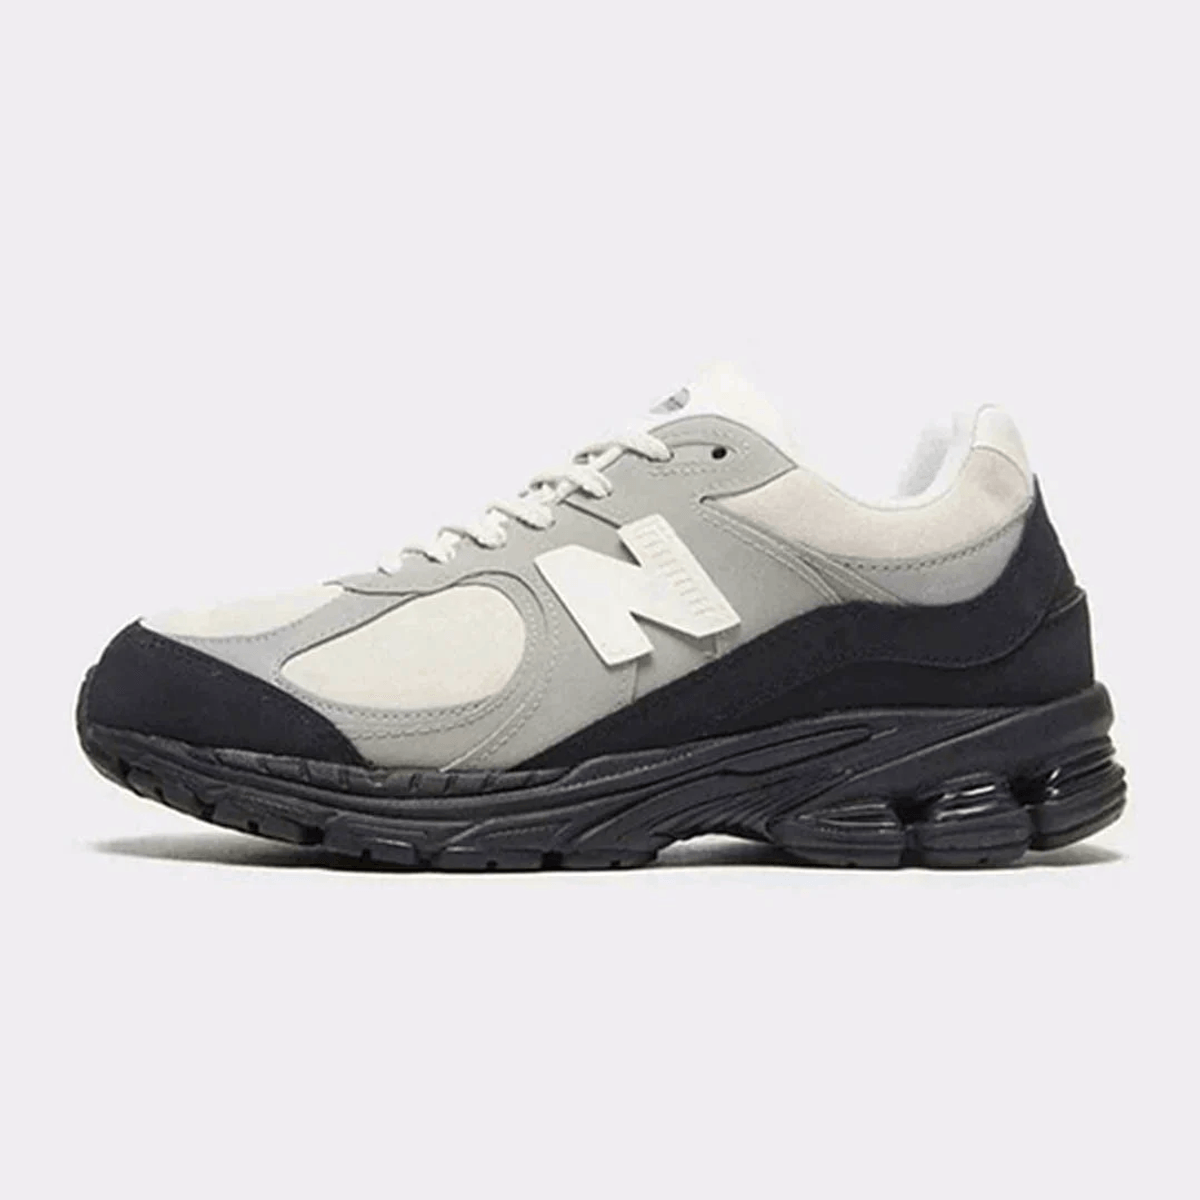 The Basement x New Balance 2002R Stone Grey Is One Of The Cleanest Collabs To Date